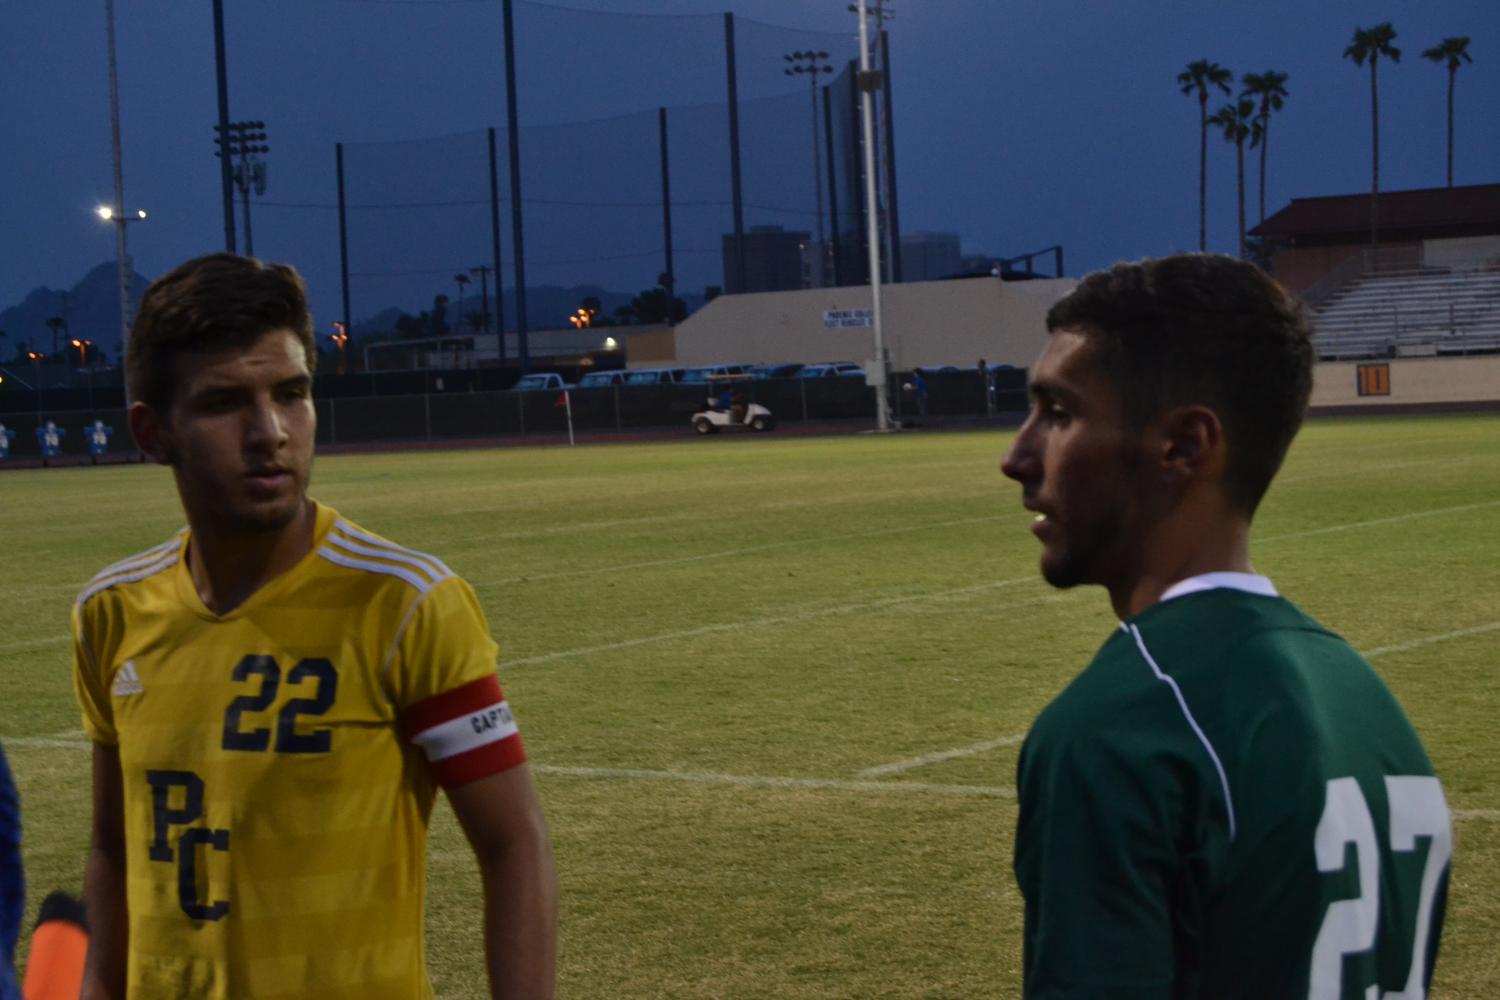 Captains, Ariel Aguas from Phoenix Community College (left) and Reece Harmbly from SCC (right), during match toss.